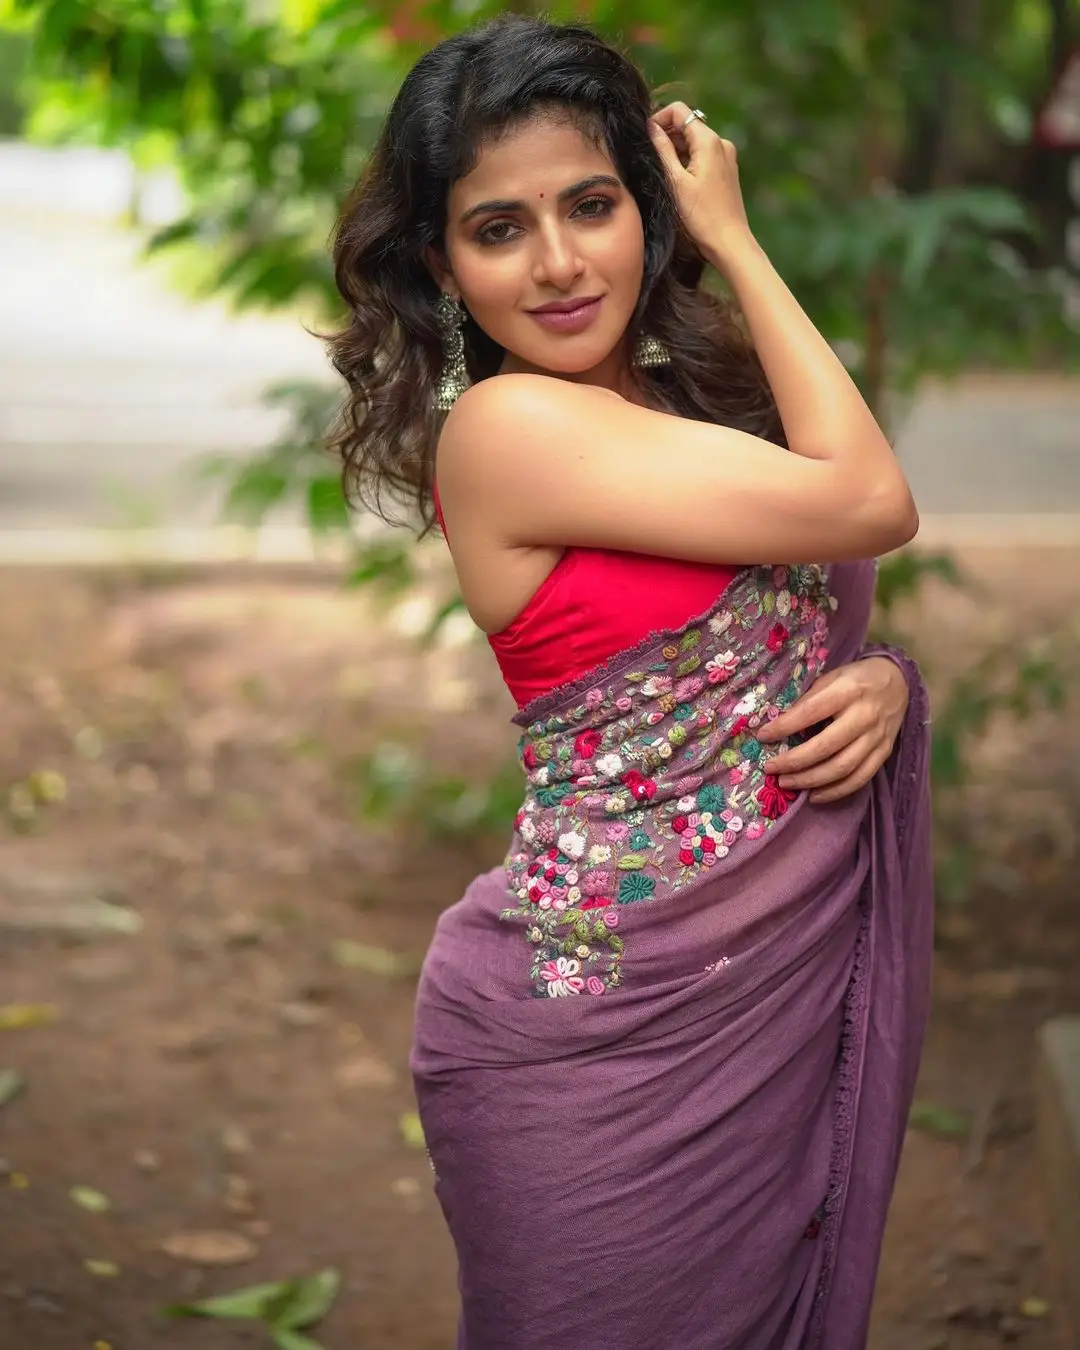 INDIAN GIRL ISWARYA MENON IN TRADITIONAL VIOLET SAREE SLEEVELESS RED BLOUSE 6